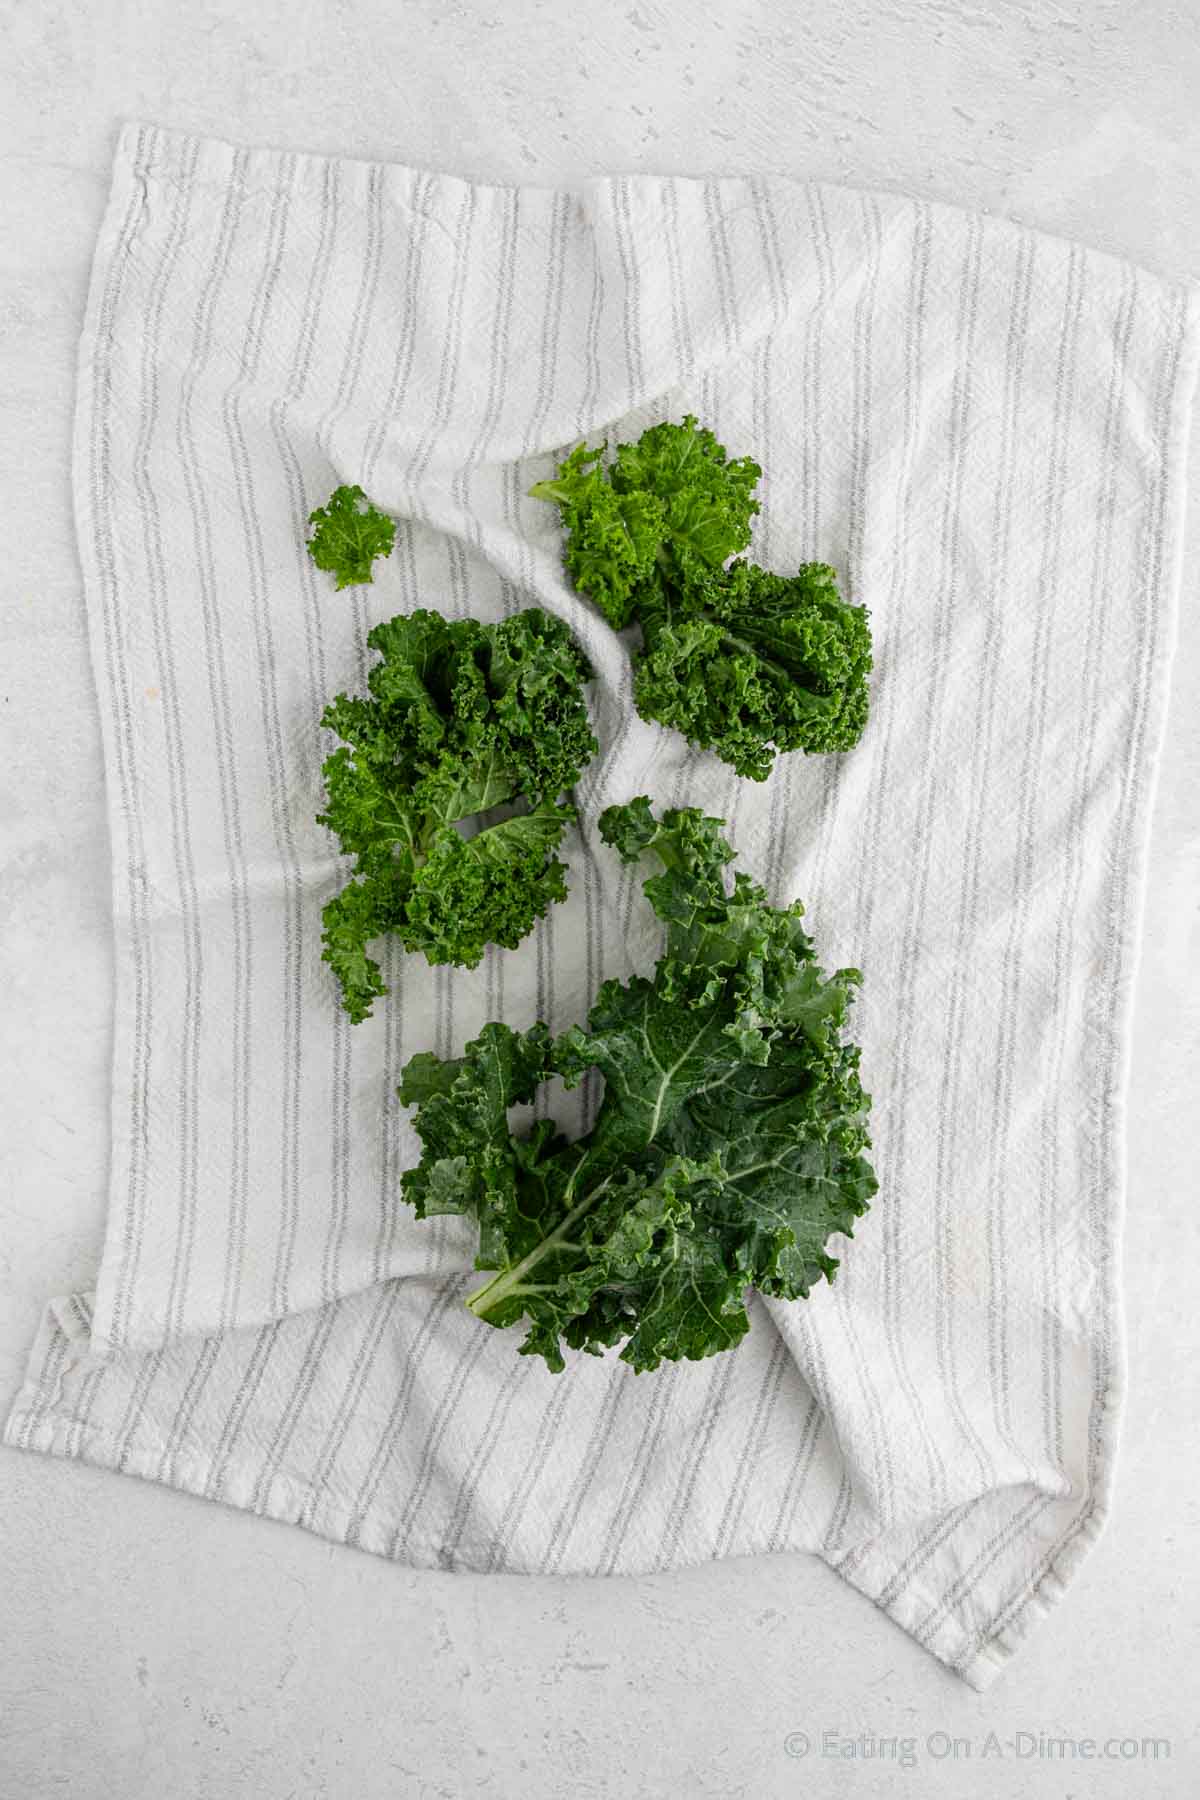 Drying the kale on a towel